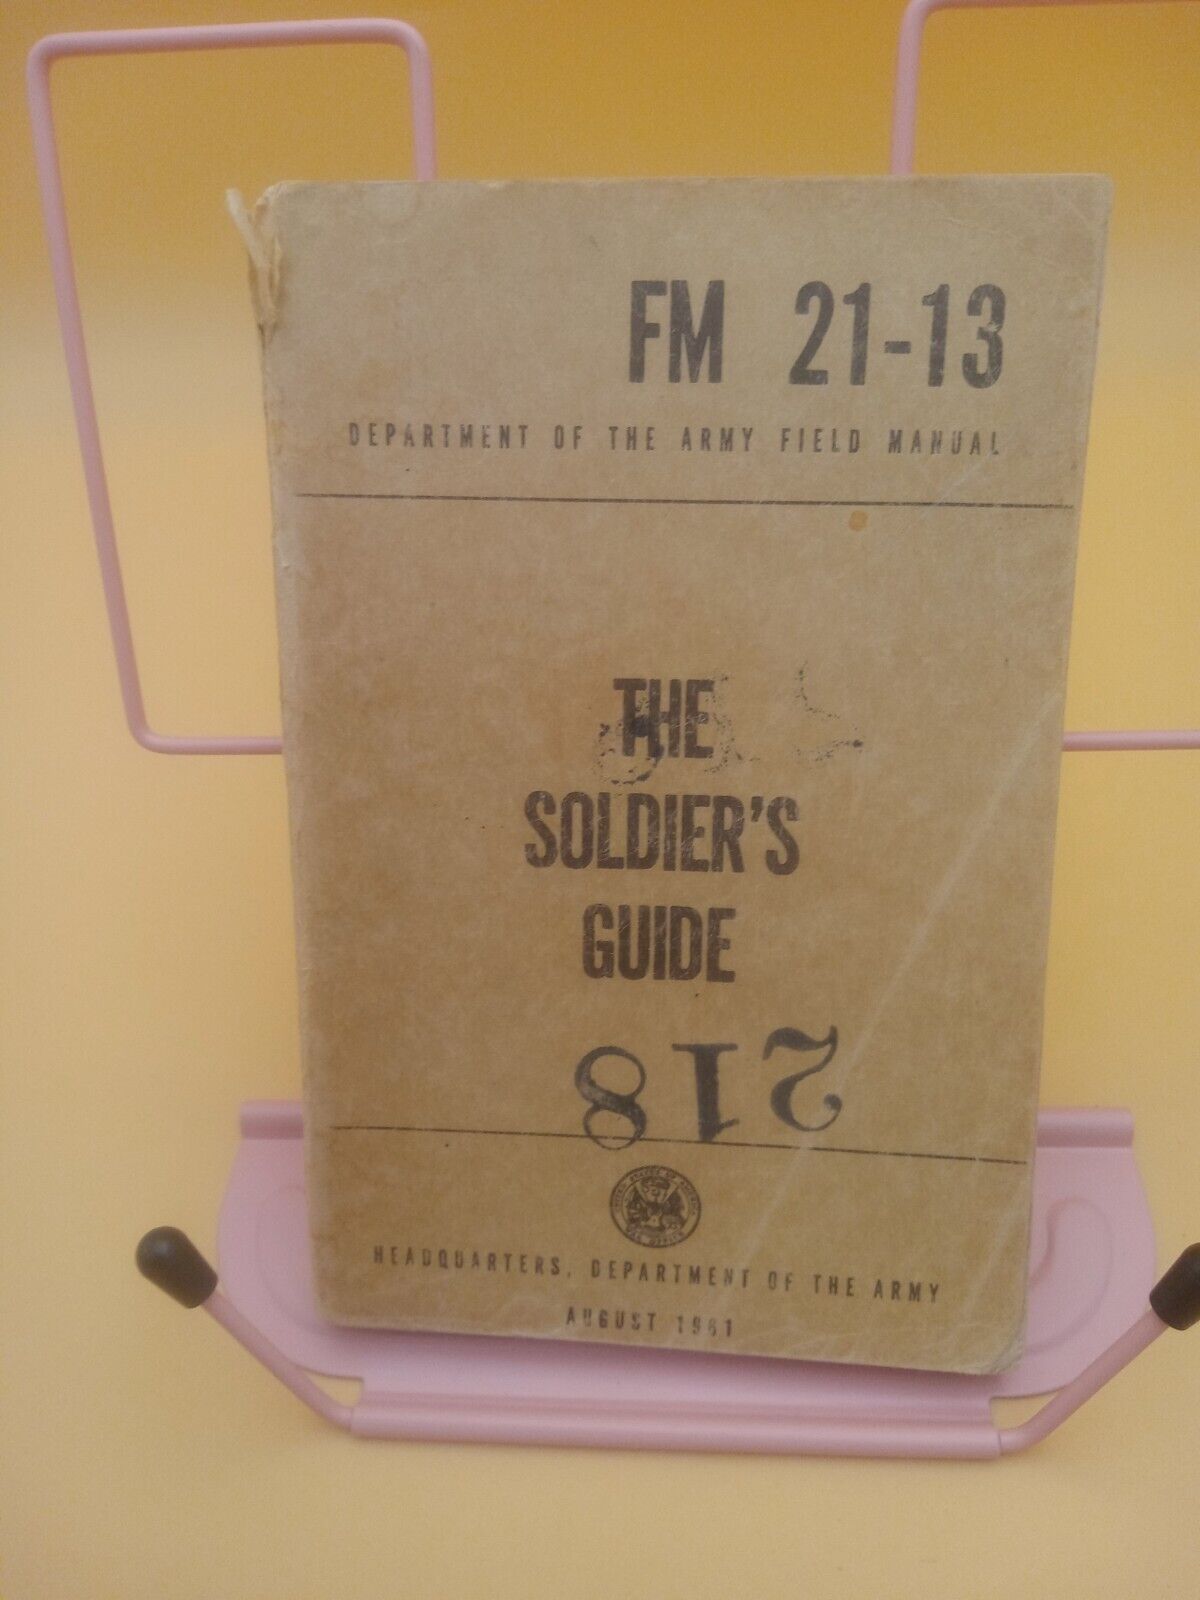 Soldiers Guide-August 1961 FM 21-13..not perfect, but no missing pages......BS-2